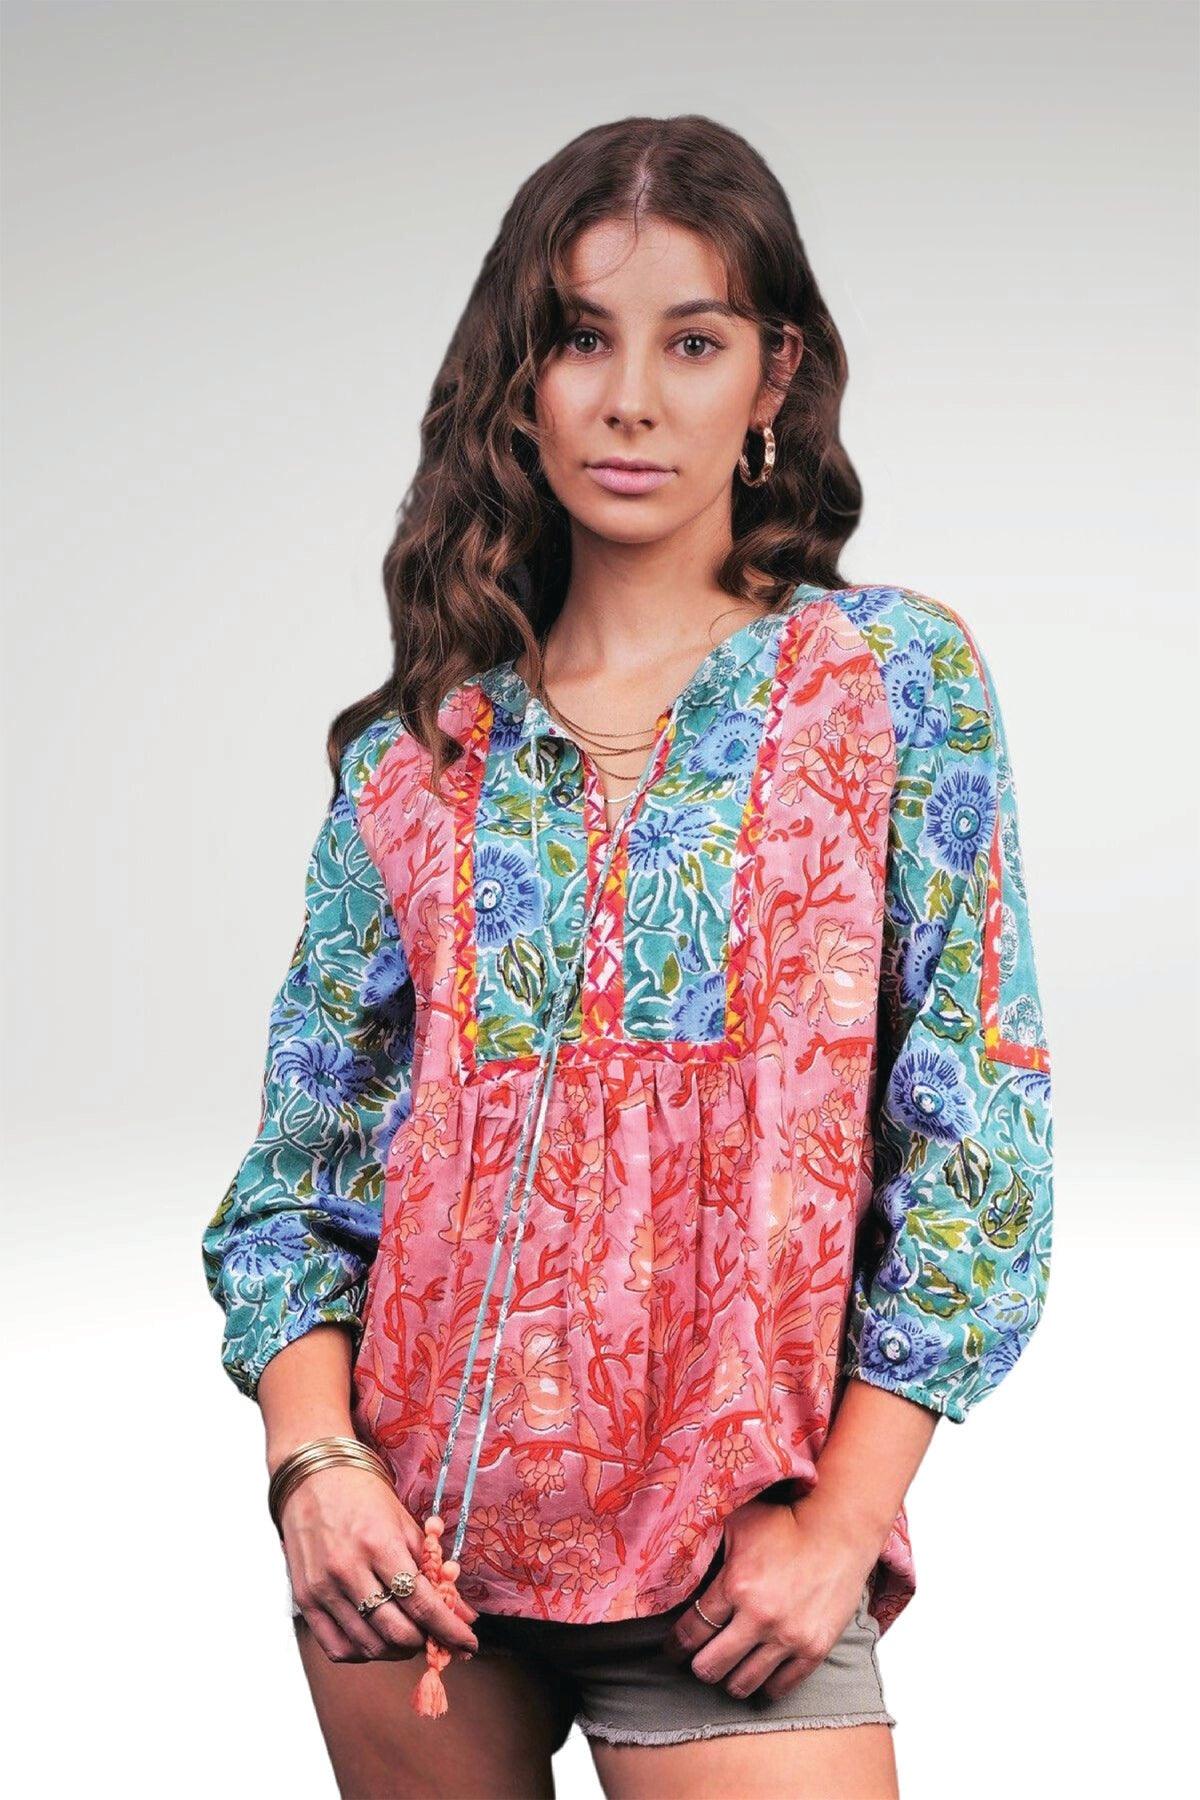 ALEENA FLORAL PATCHWORK TOP - zohaonline- SEA PINK COLOURWAY WITH TASSEL TIES - ZOOMED IN FRONT VIEW